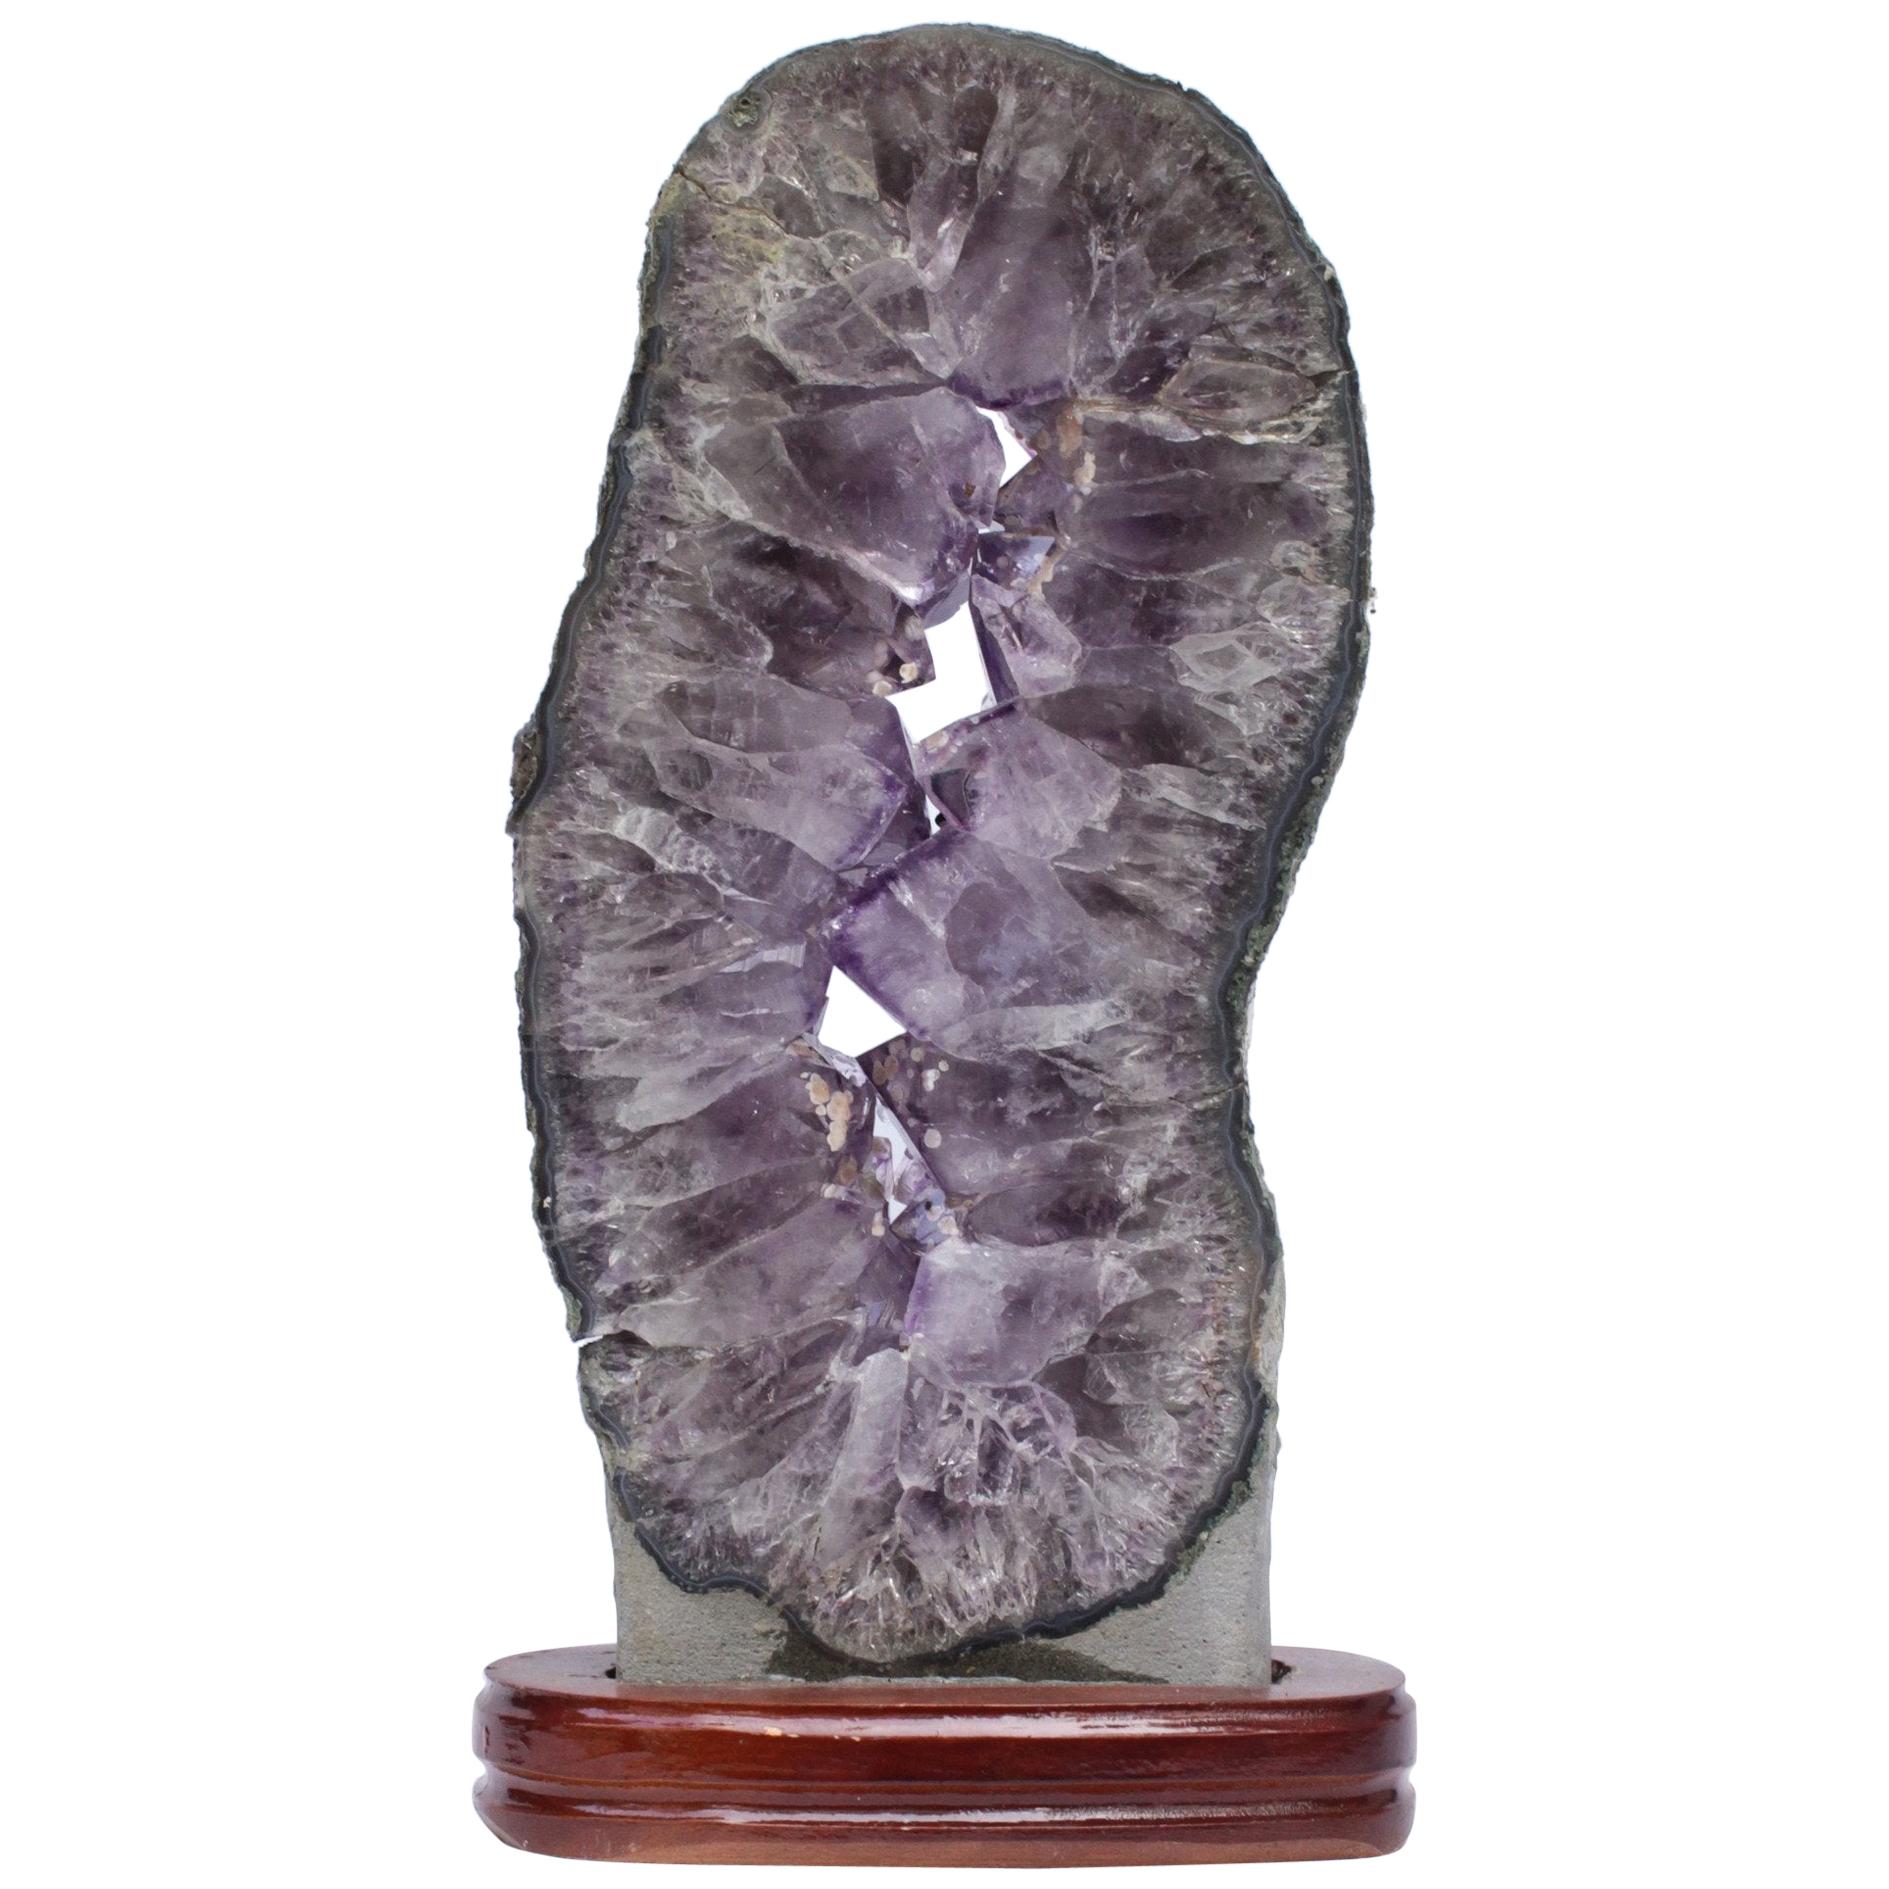 Amethyst Slice with Calcite Deposits and a Baroque Pearl on a Polished Wood Base